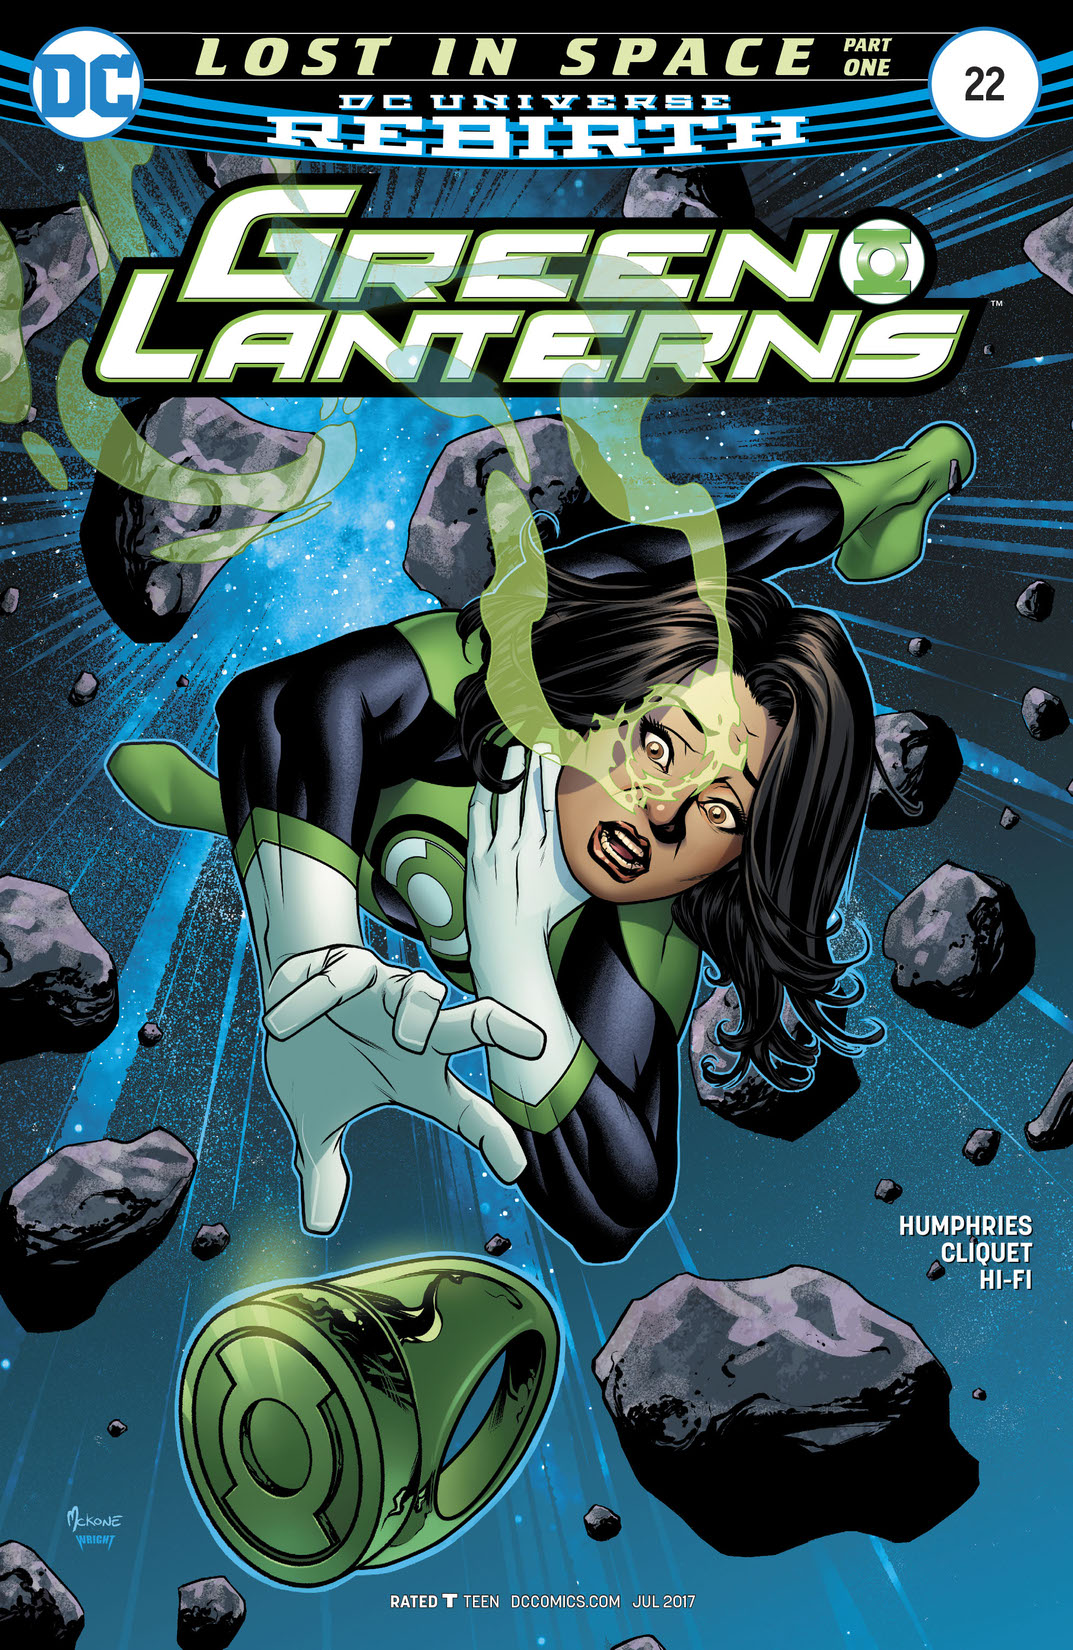 Green Lanterns #22 preview images